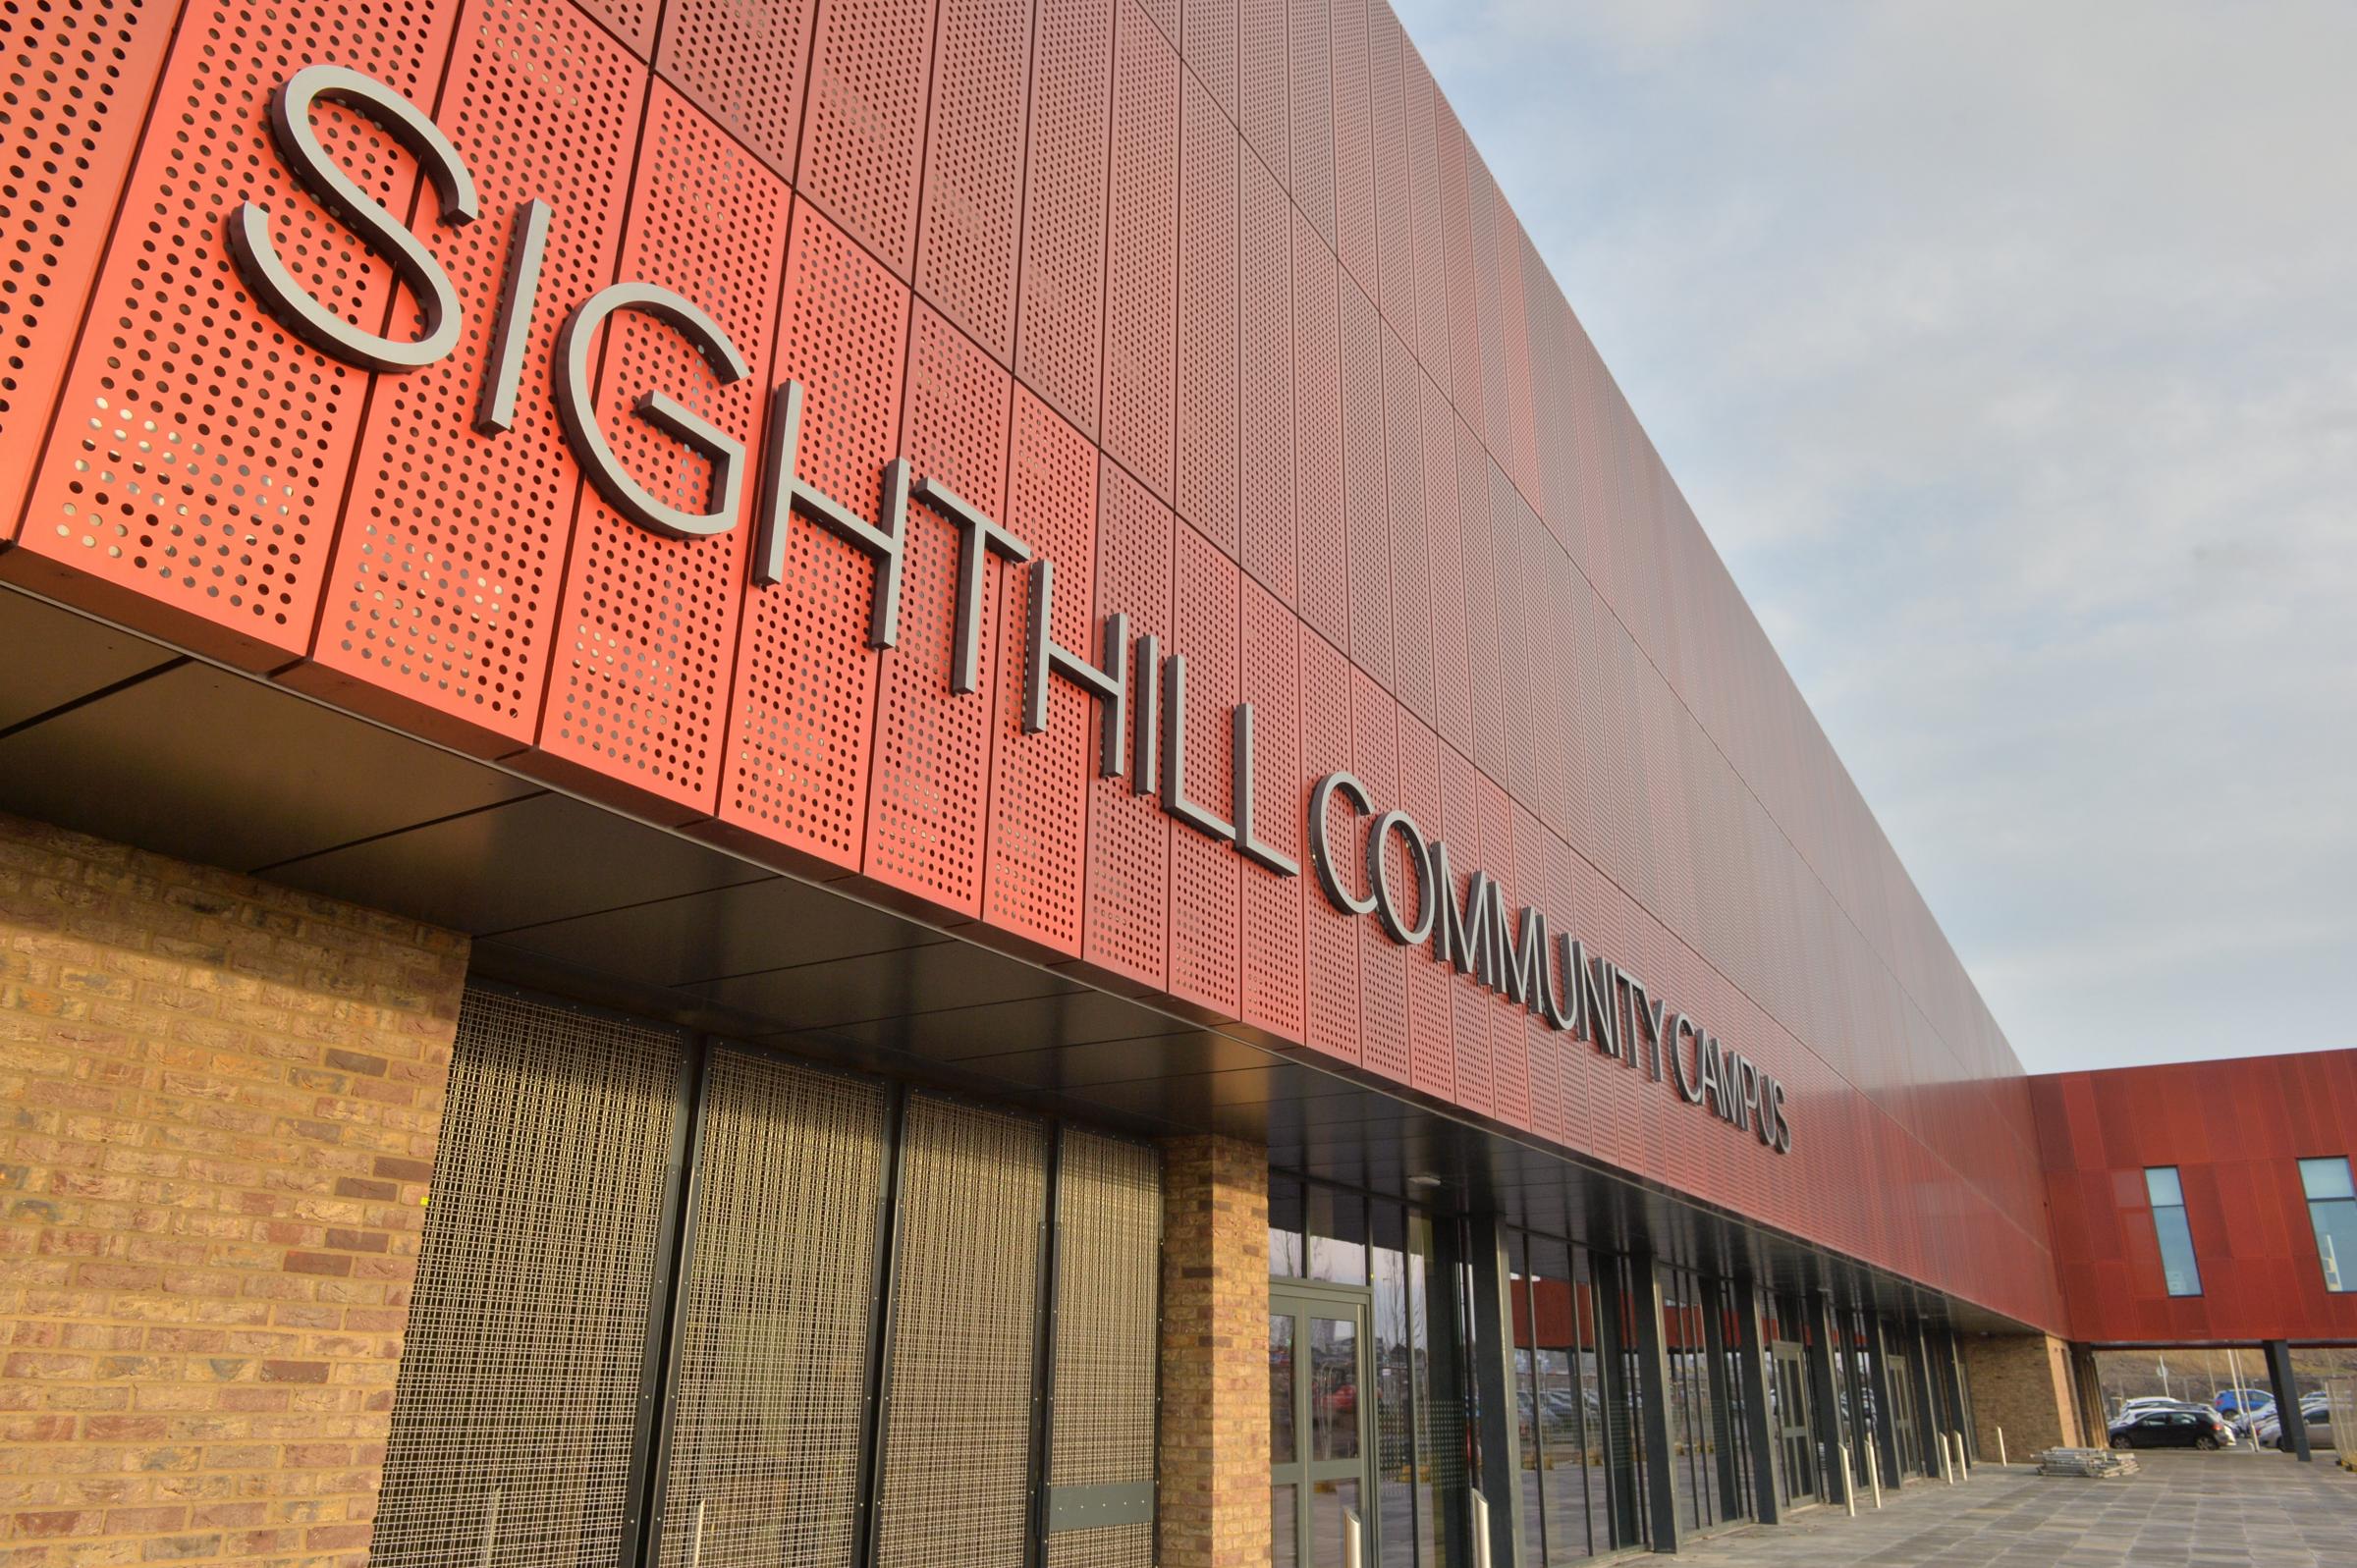 Two Sighthill primary schools in Glasgow will now merge